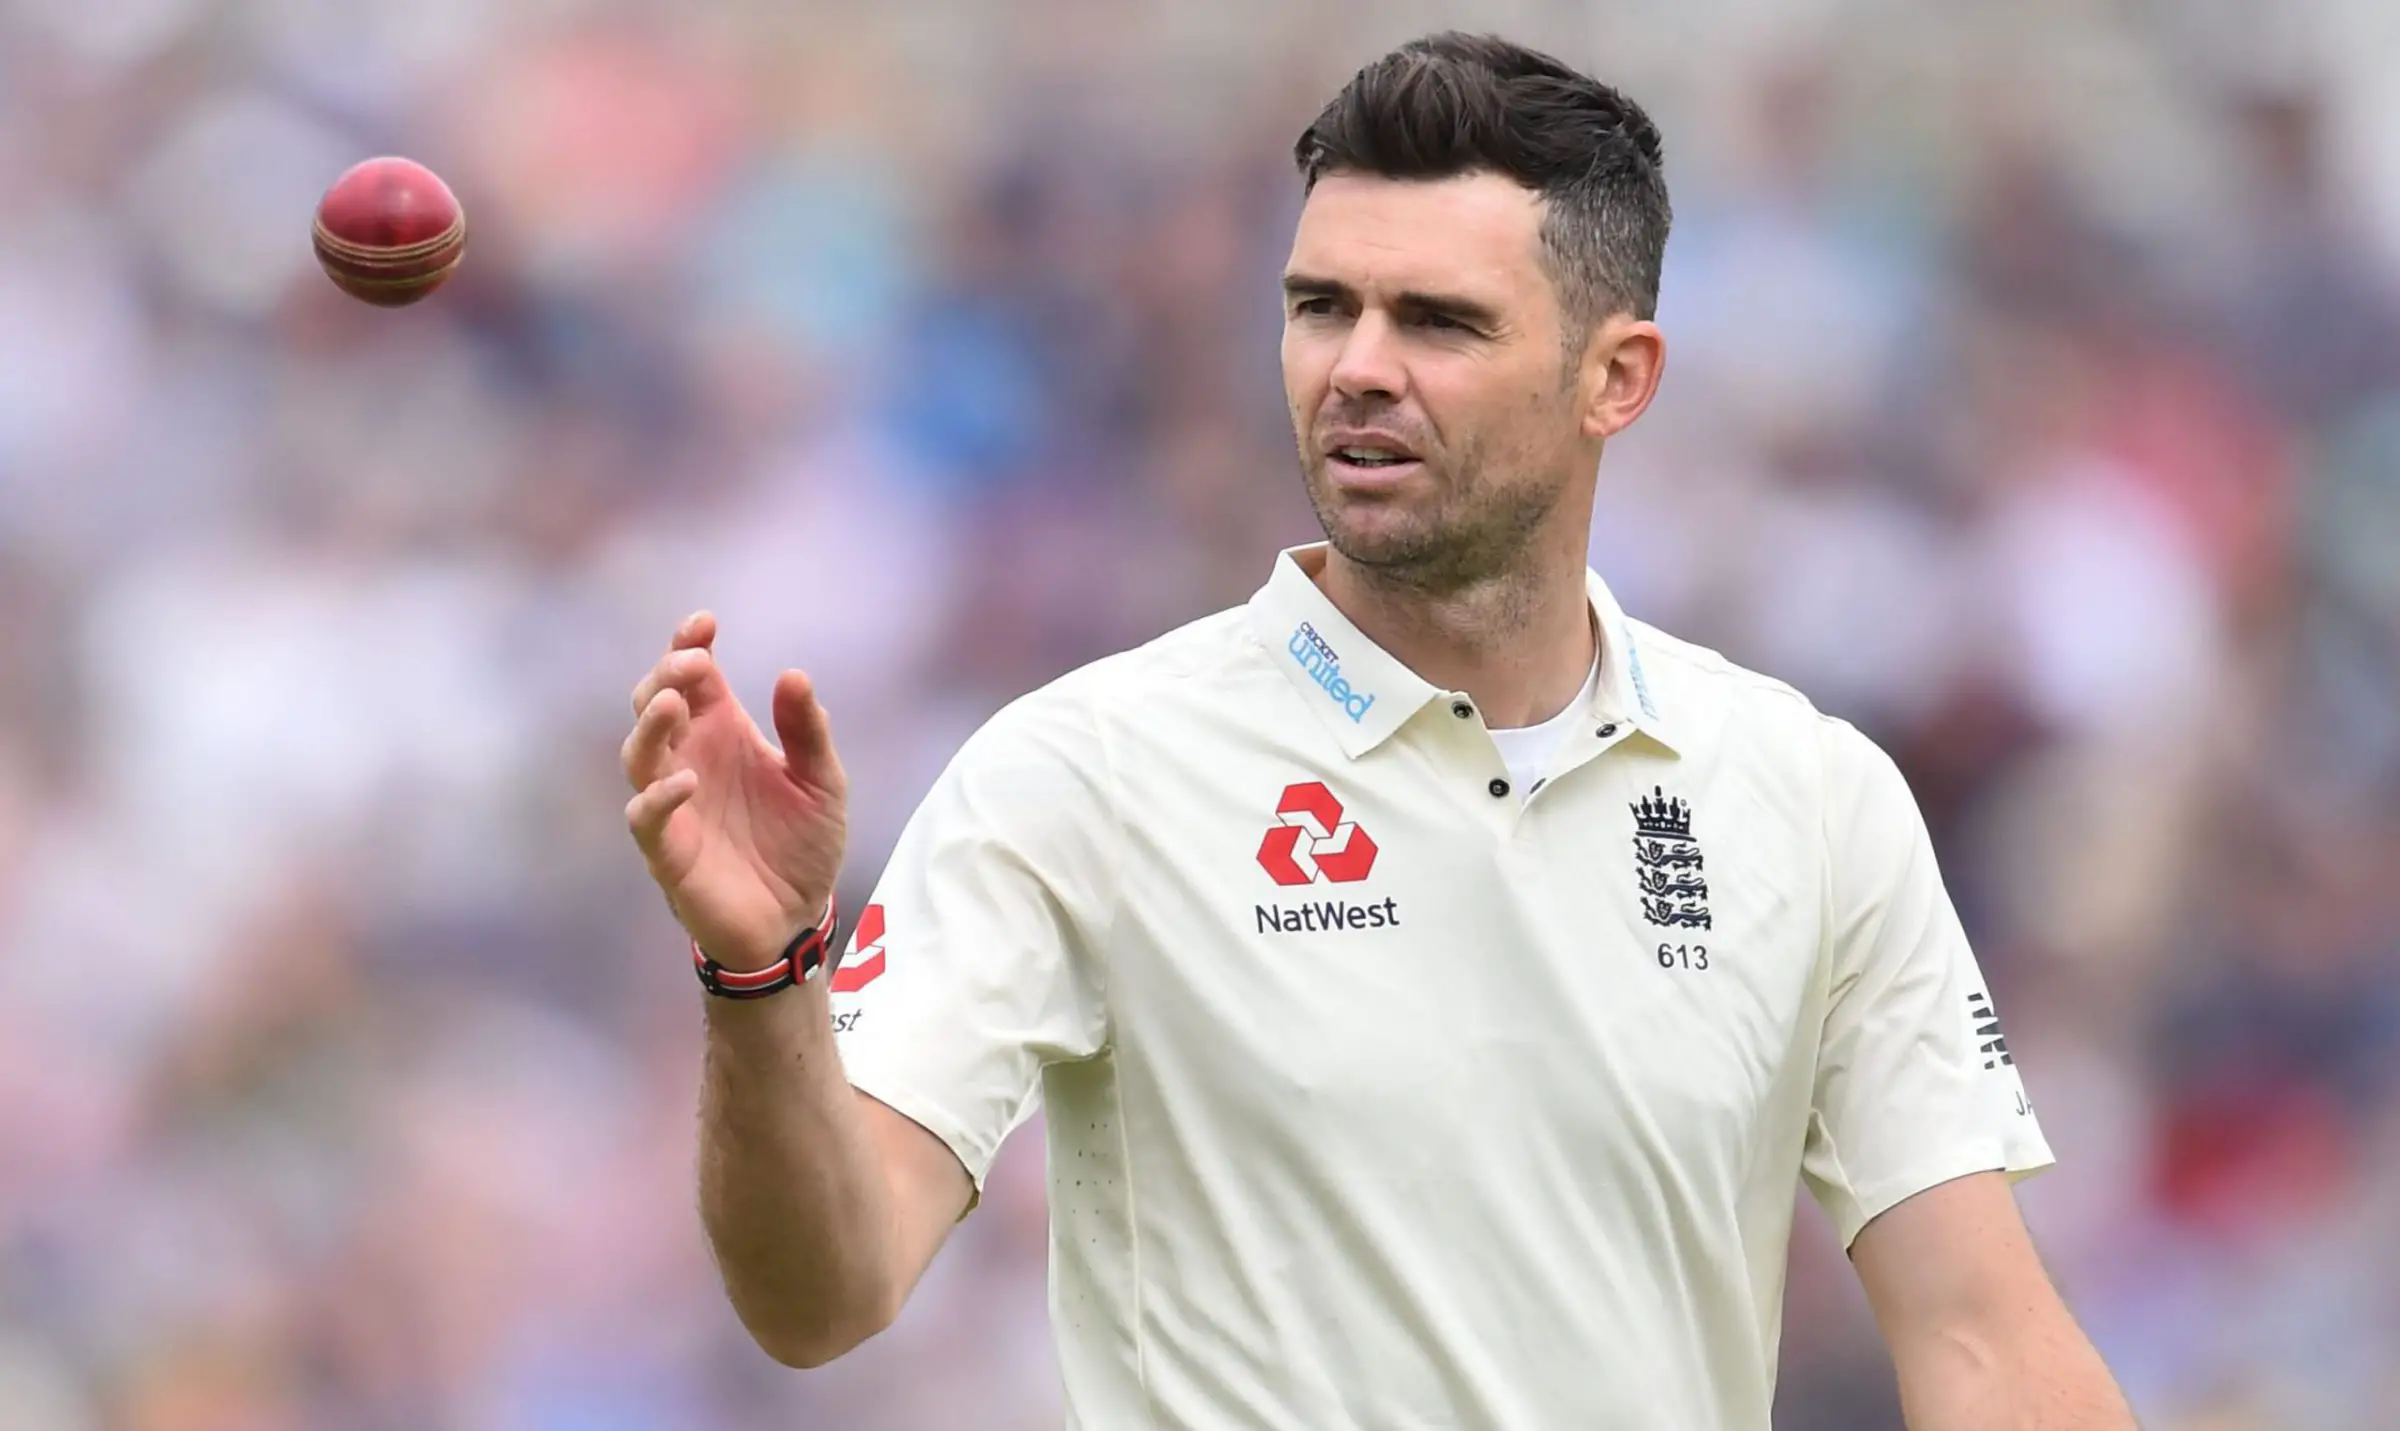 James Anderson diminished retirement's rumors. Image courtesy: EssentiallySports